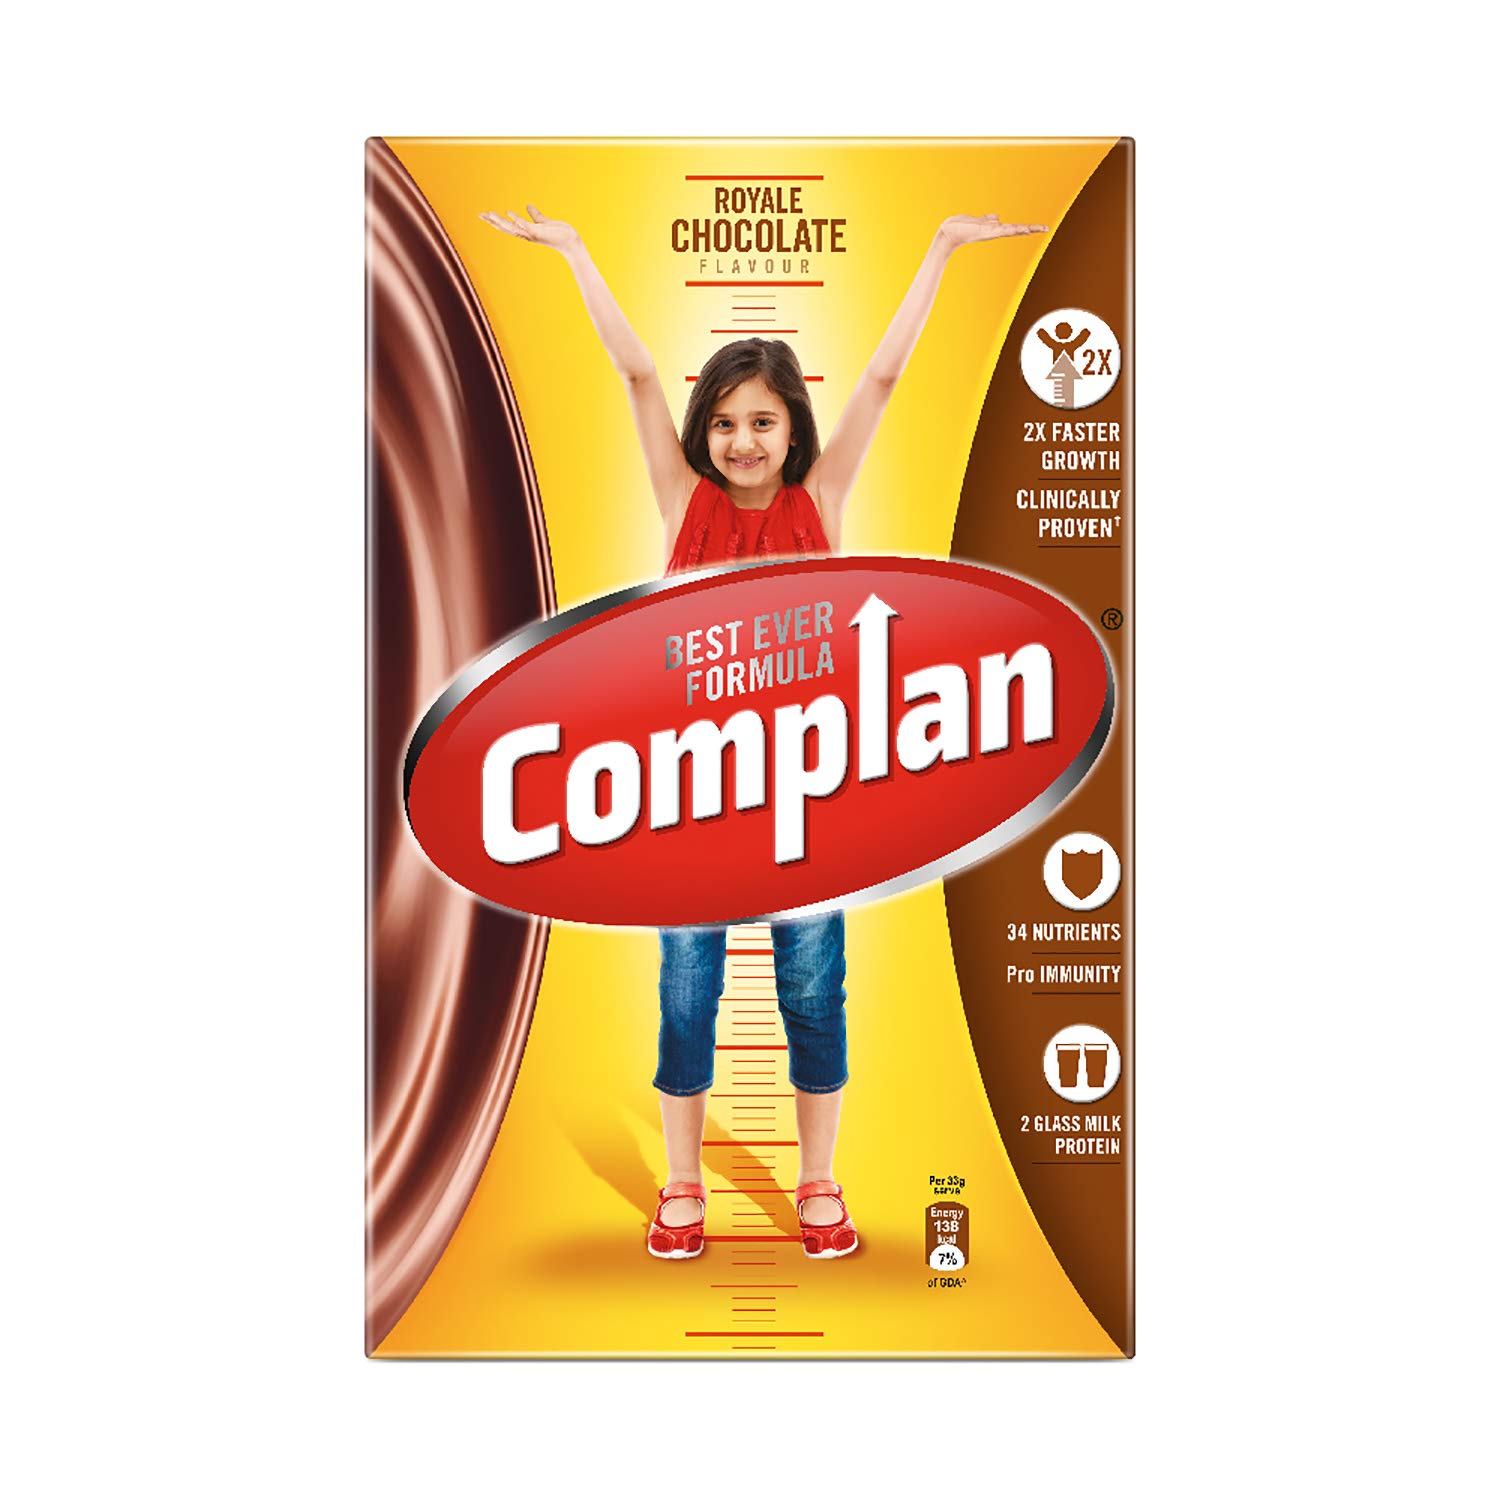 Complan Nutrition And Health Drink Royale Chocolate 750 G Carton